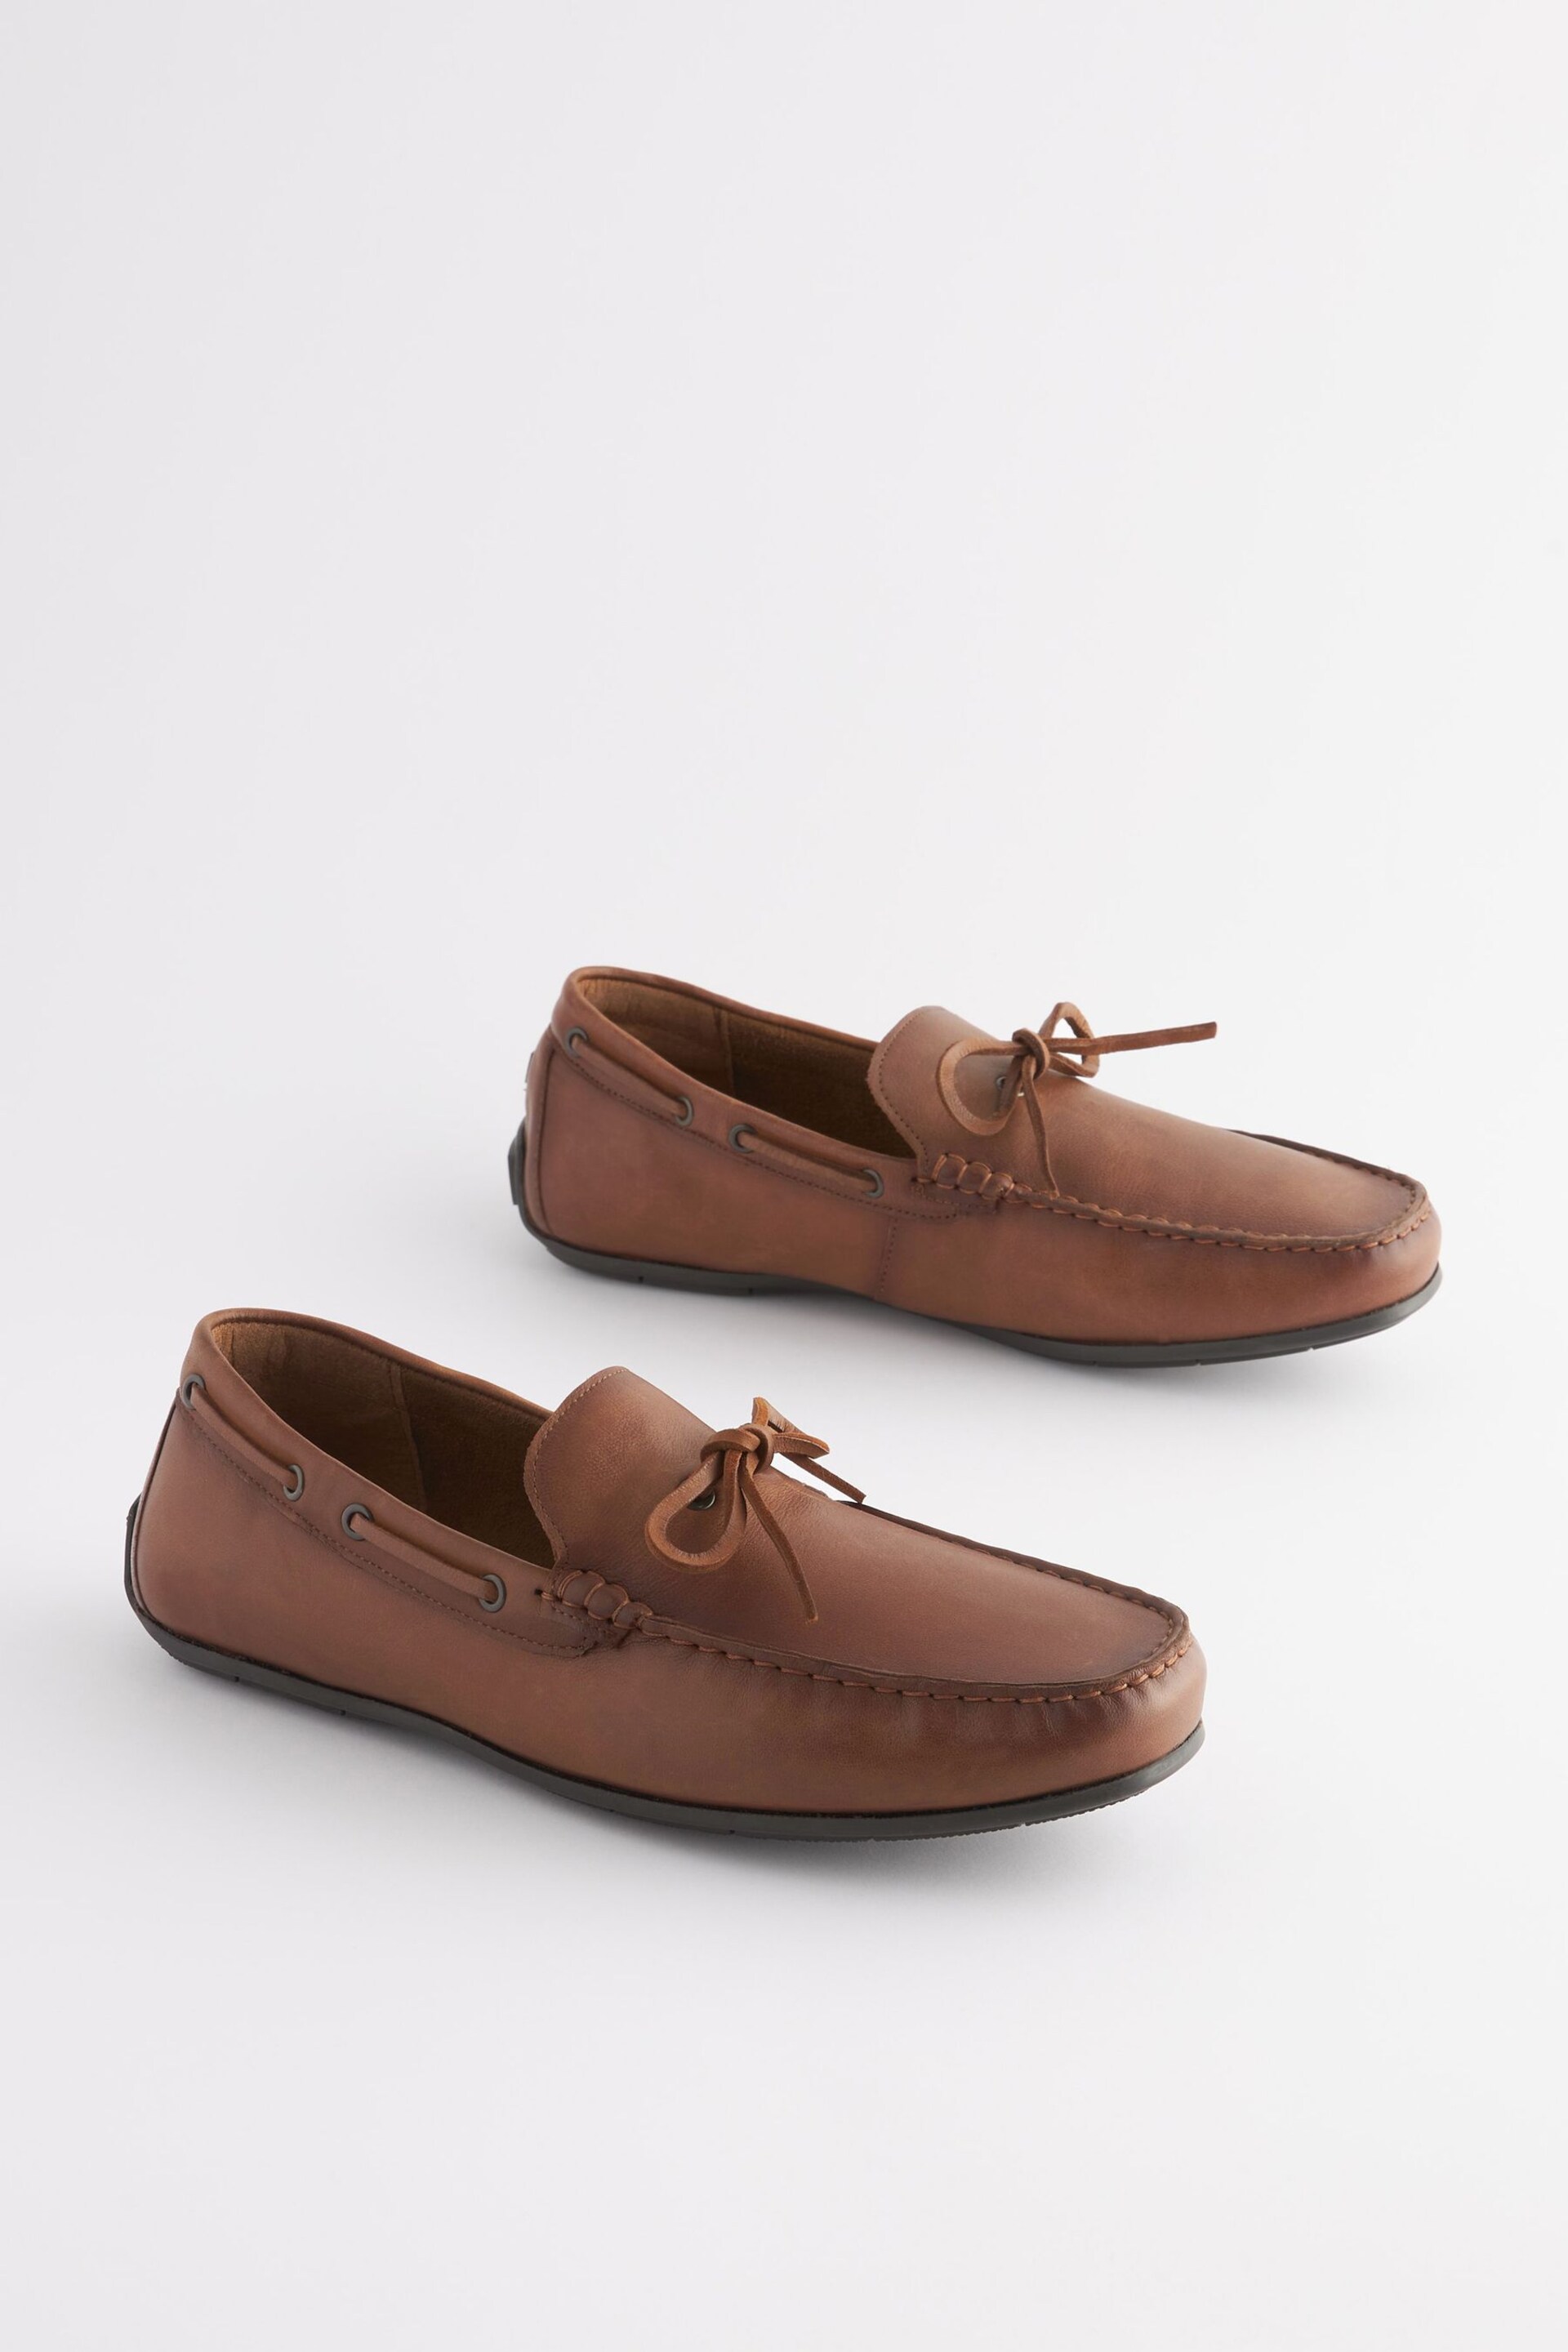 Tan Brown Leather Driving Shoes - Image 1 of 5